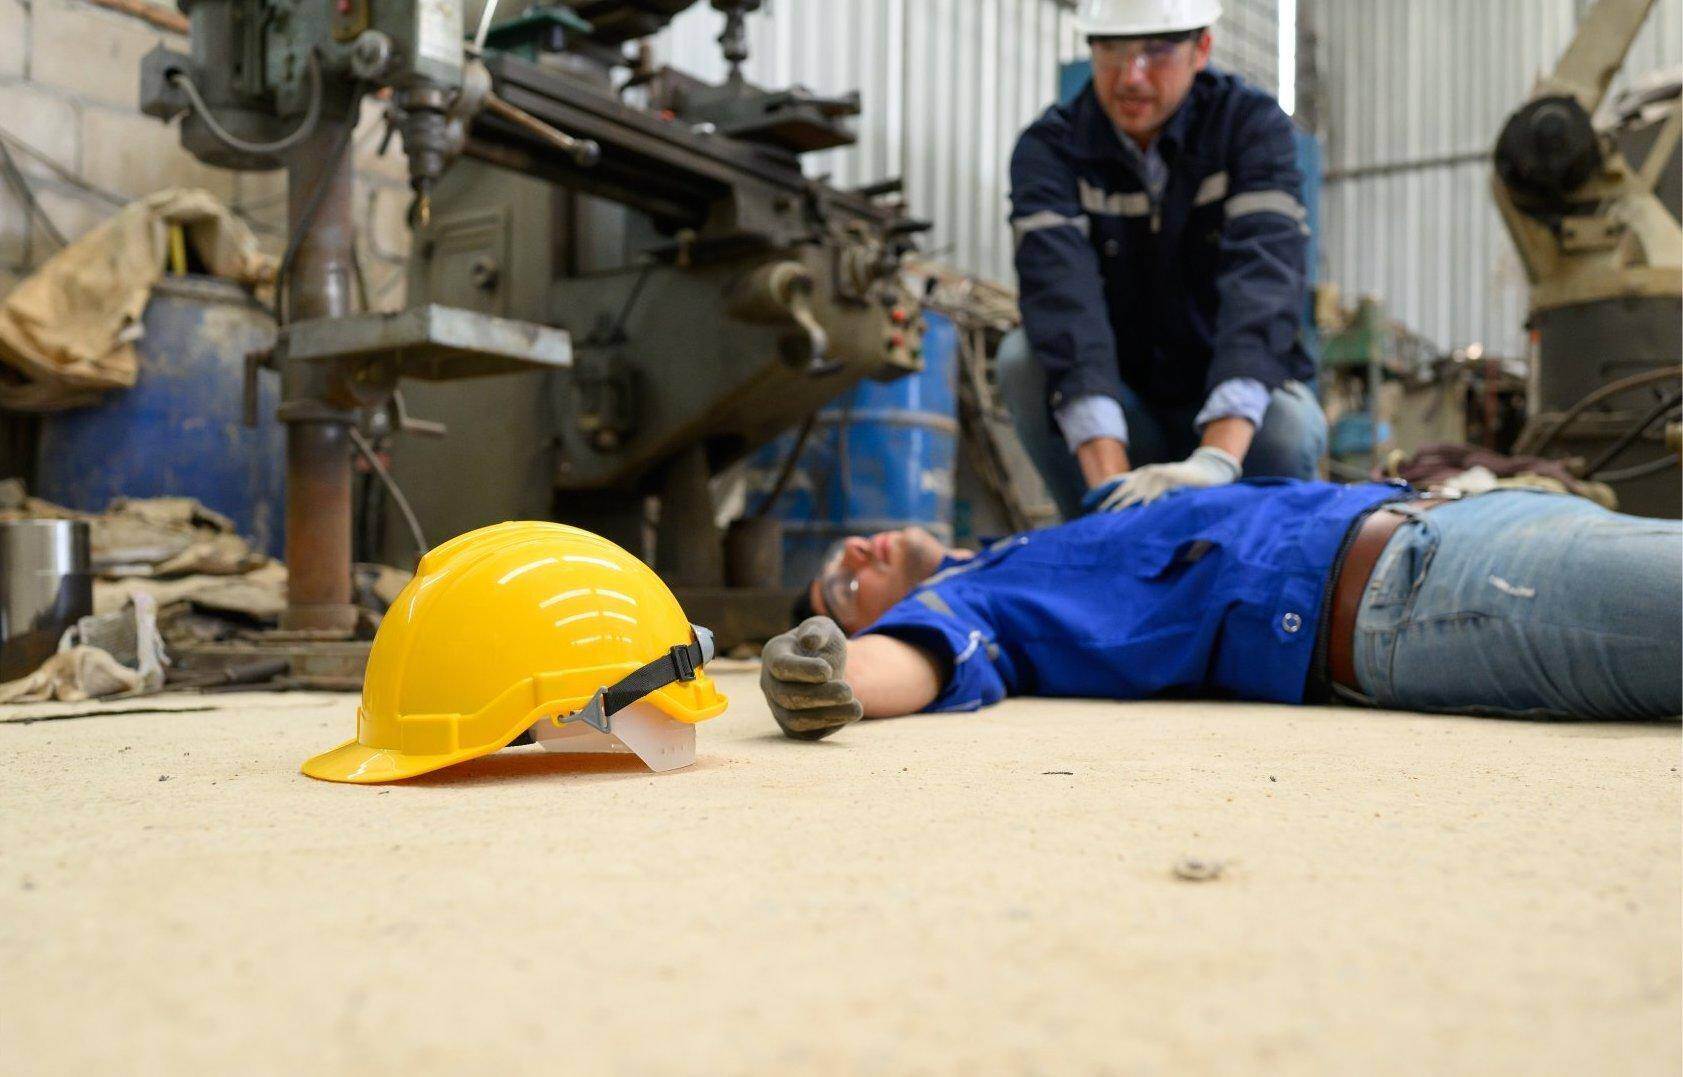 An unconscious man who has been injured on the job who will file for workers compensation in Conyers, Georgia